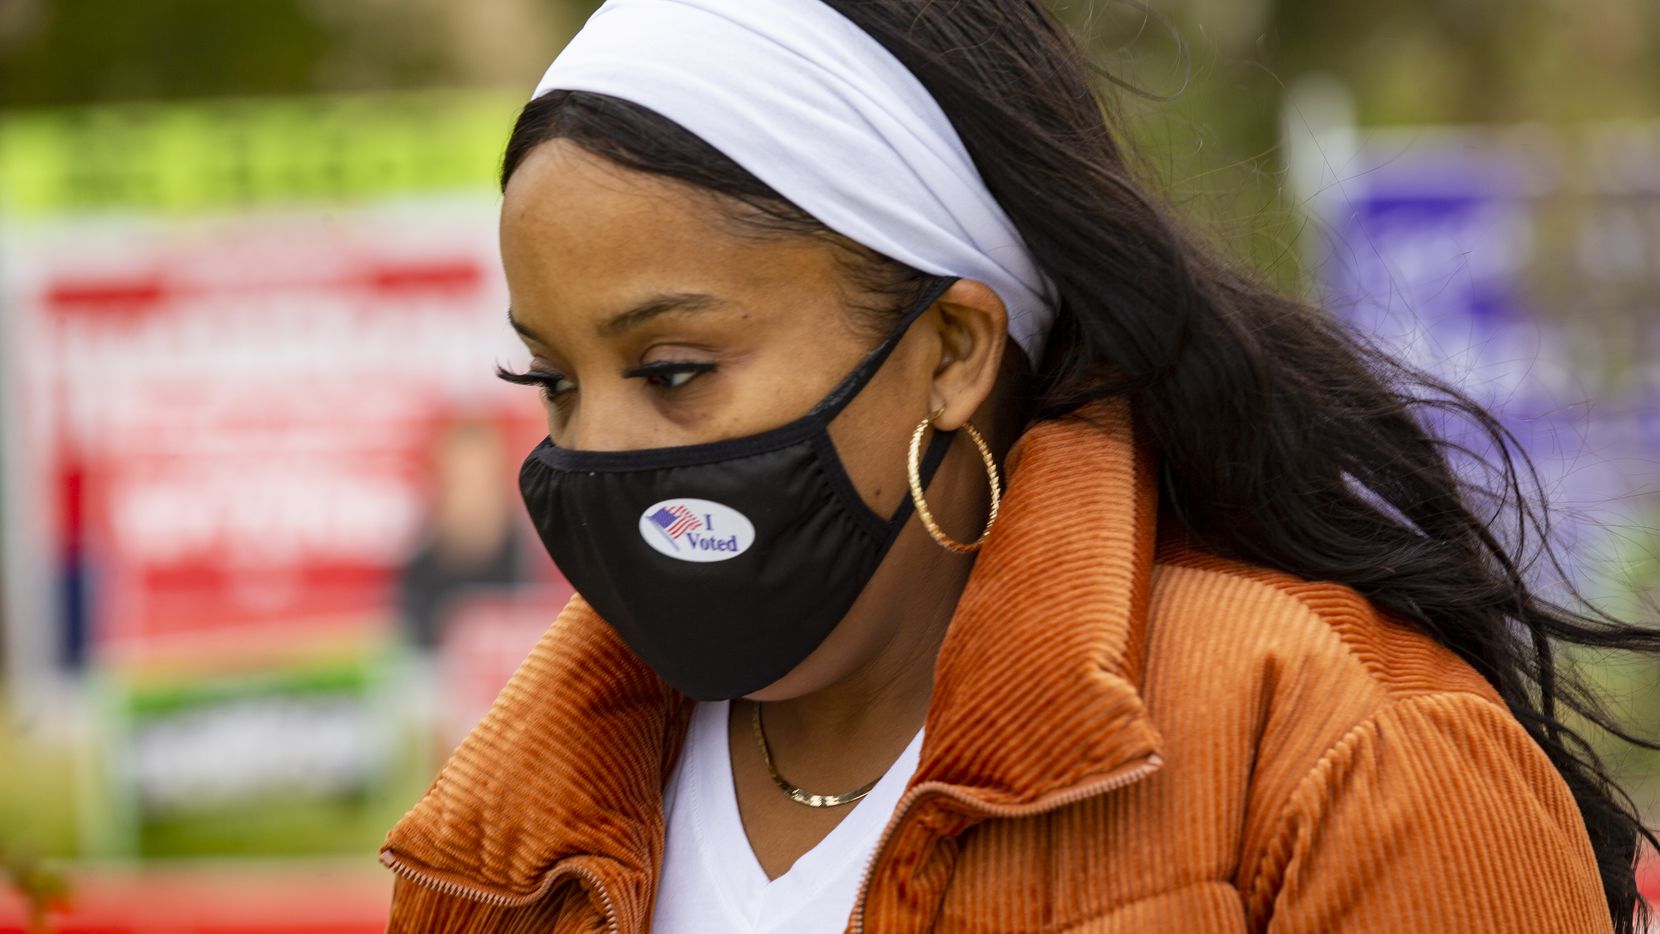 Wanda Brooks wears an "I voted" sticker on her mask after voting at the Collin College campus in Wylie on Thursday.